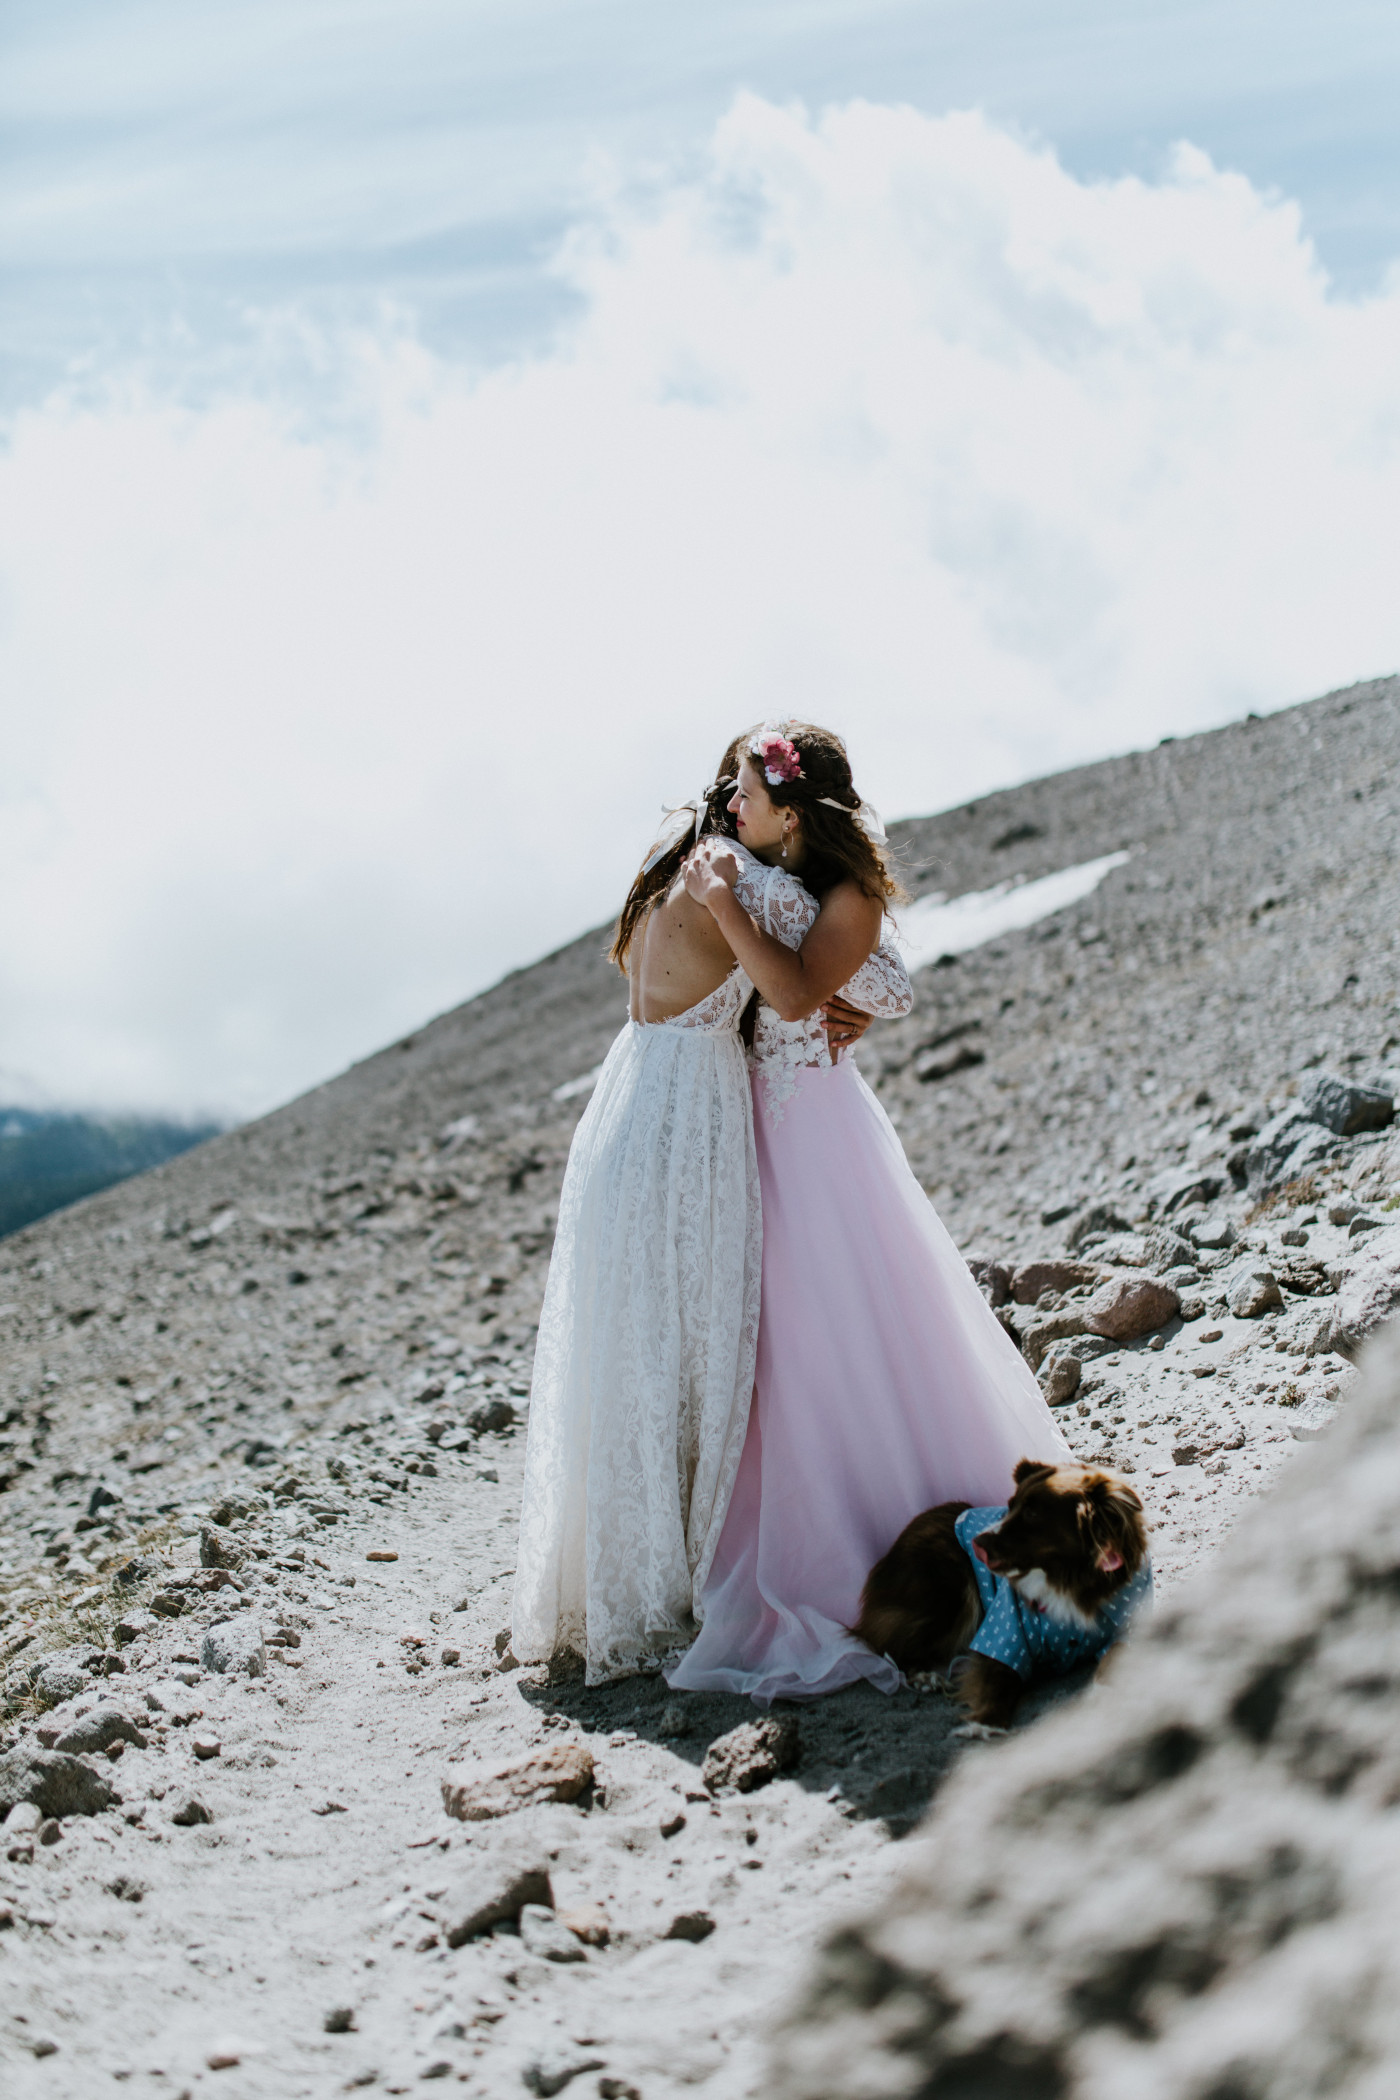 Margaux and Heather hug as they dance. Elopement photography at Mount Hood by Sienna Plus Josh.